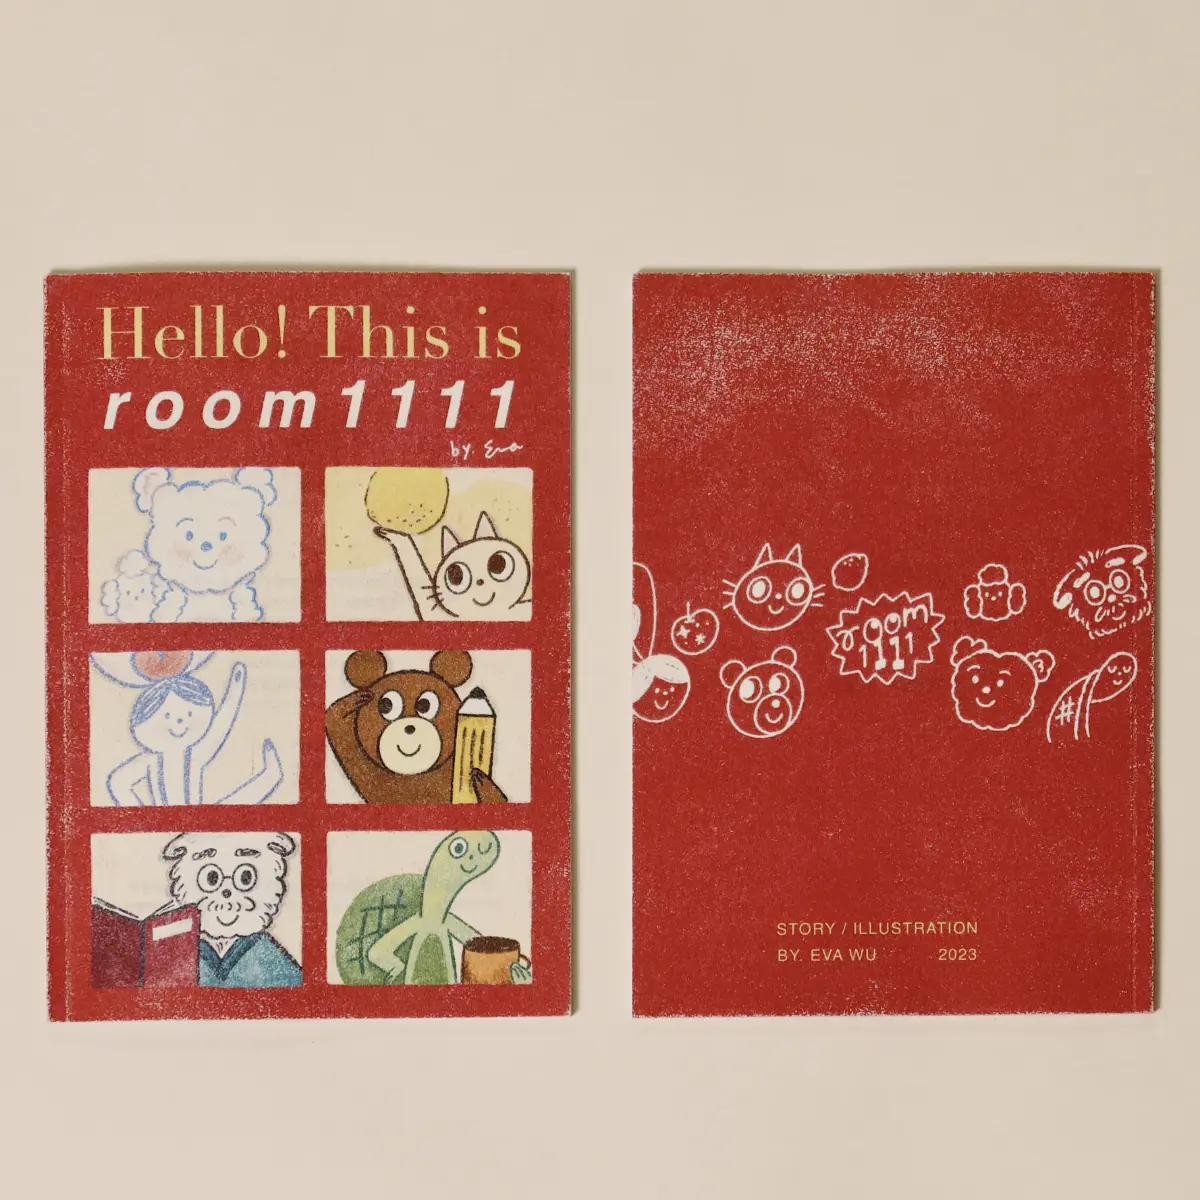 Hello! This is room 1111